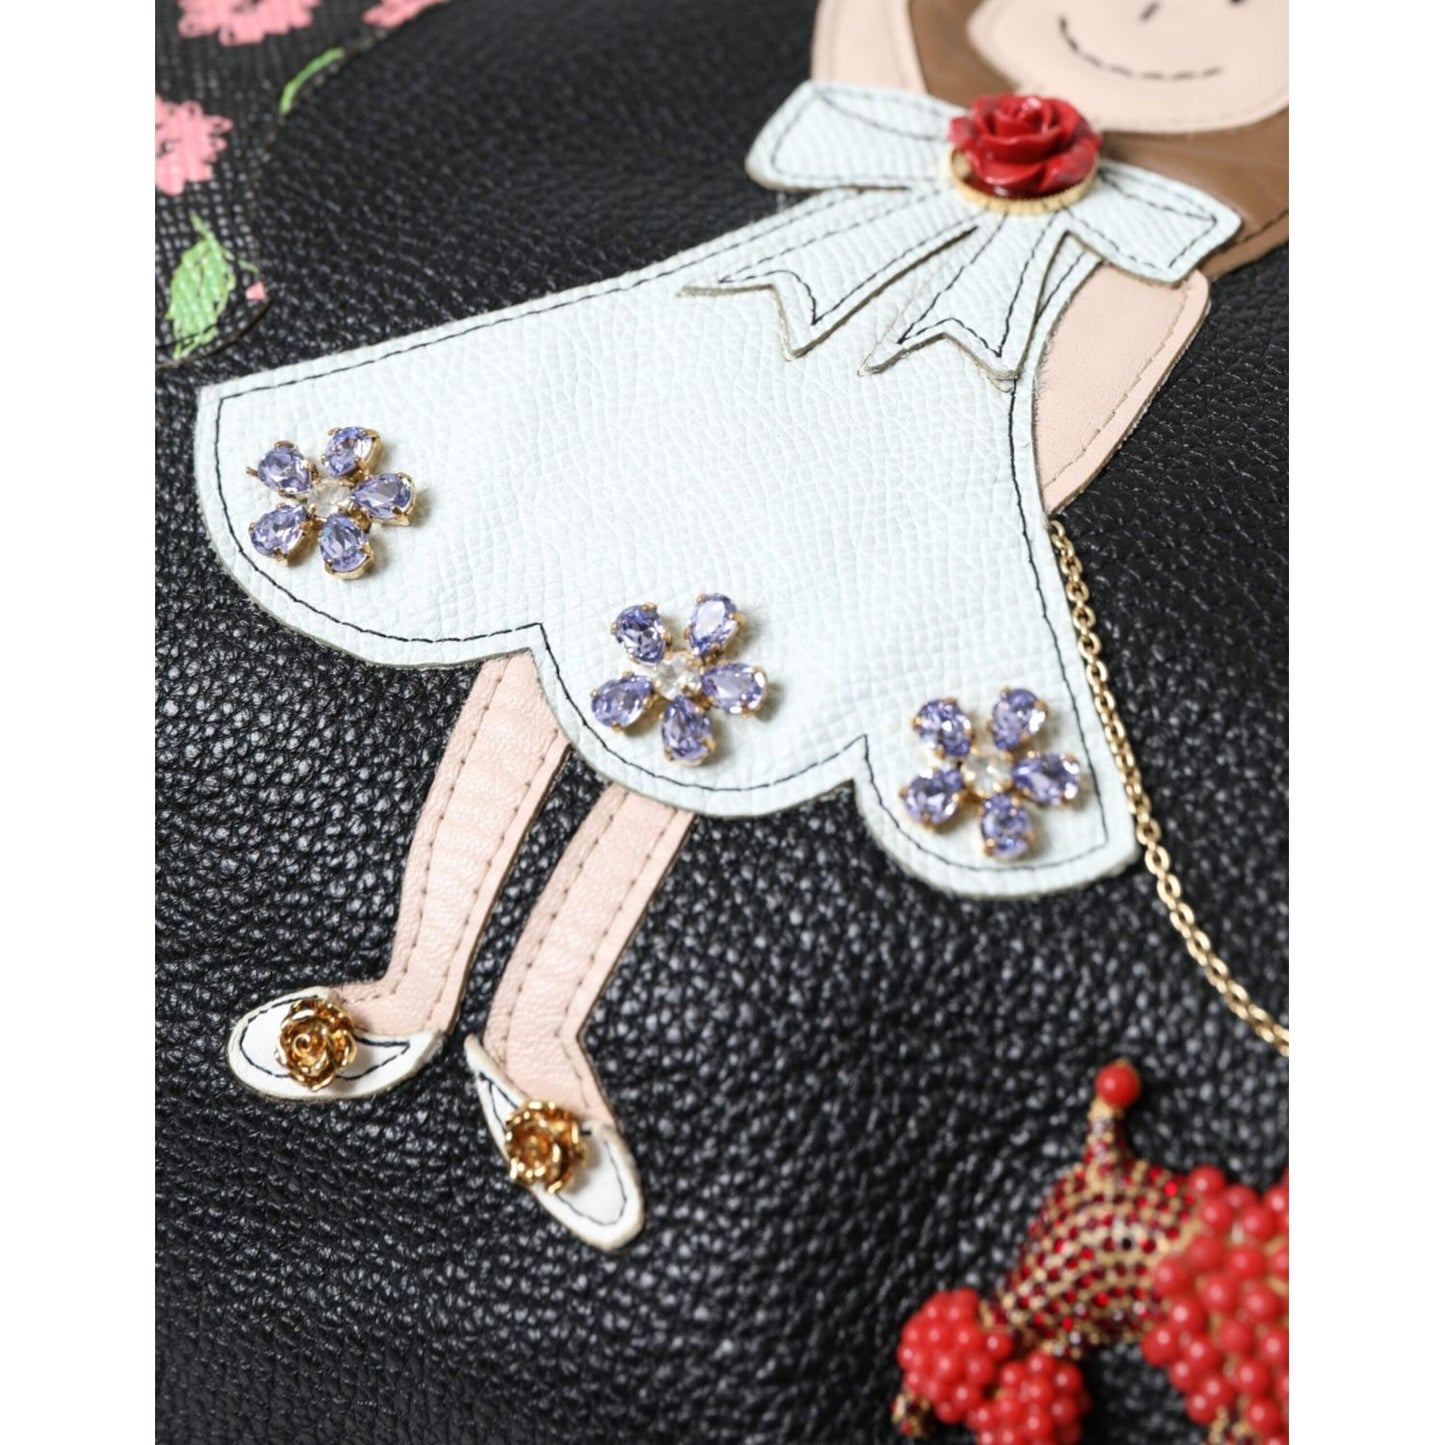 Black Leather #DGFamily Patch Shopping Tote Bag